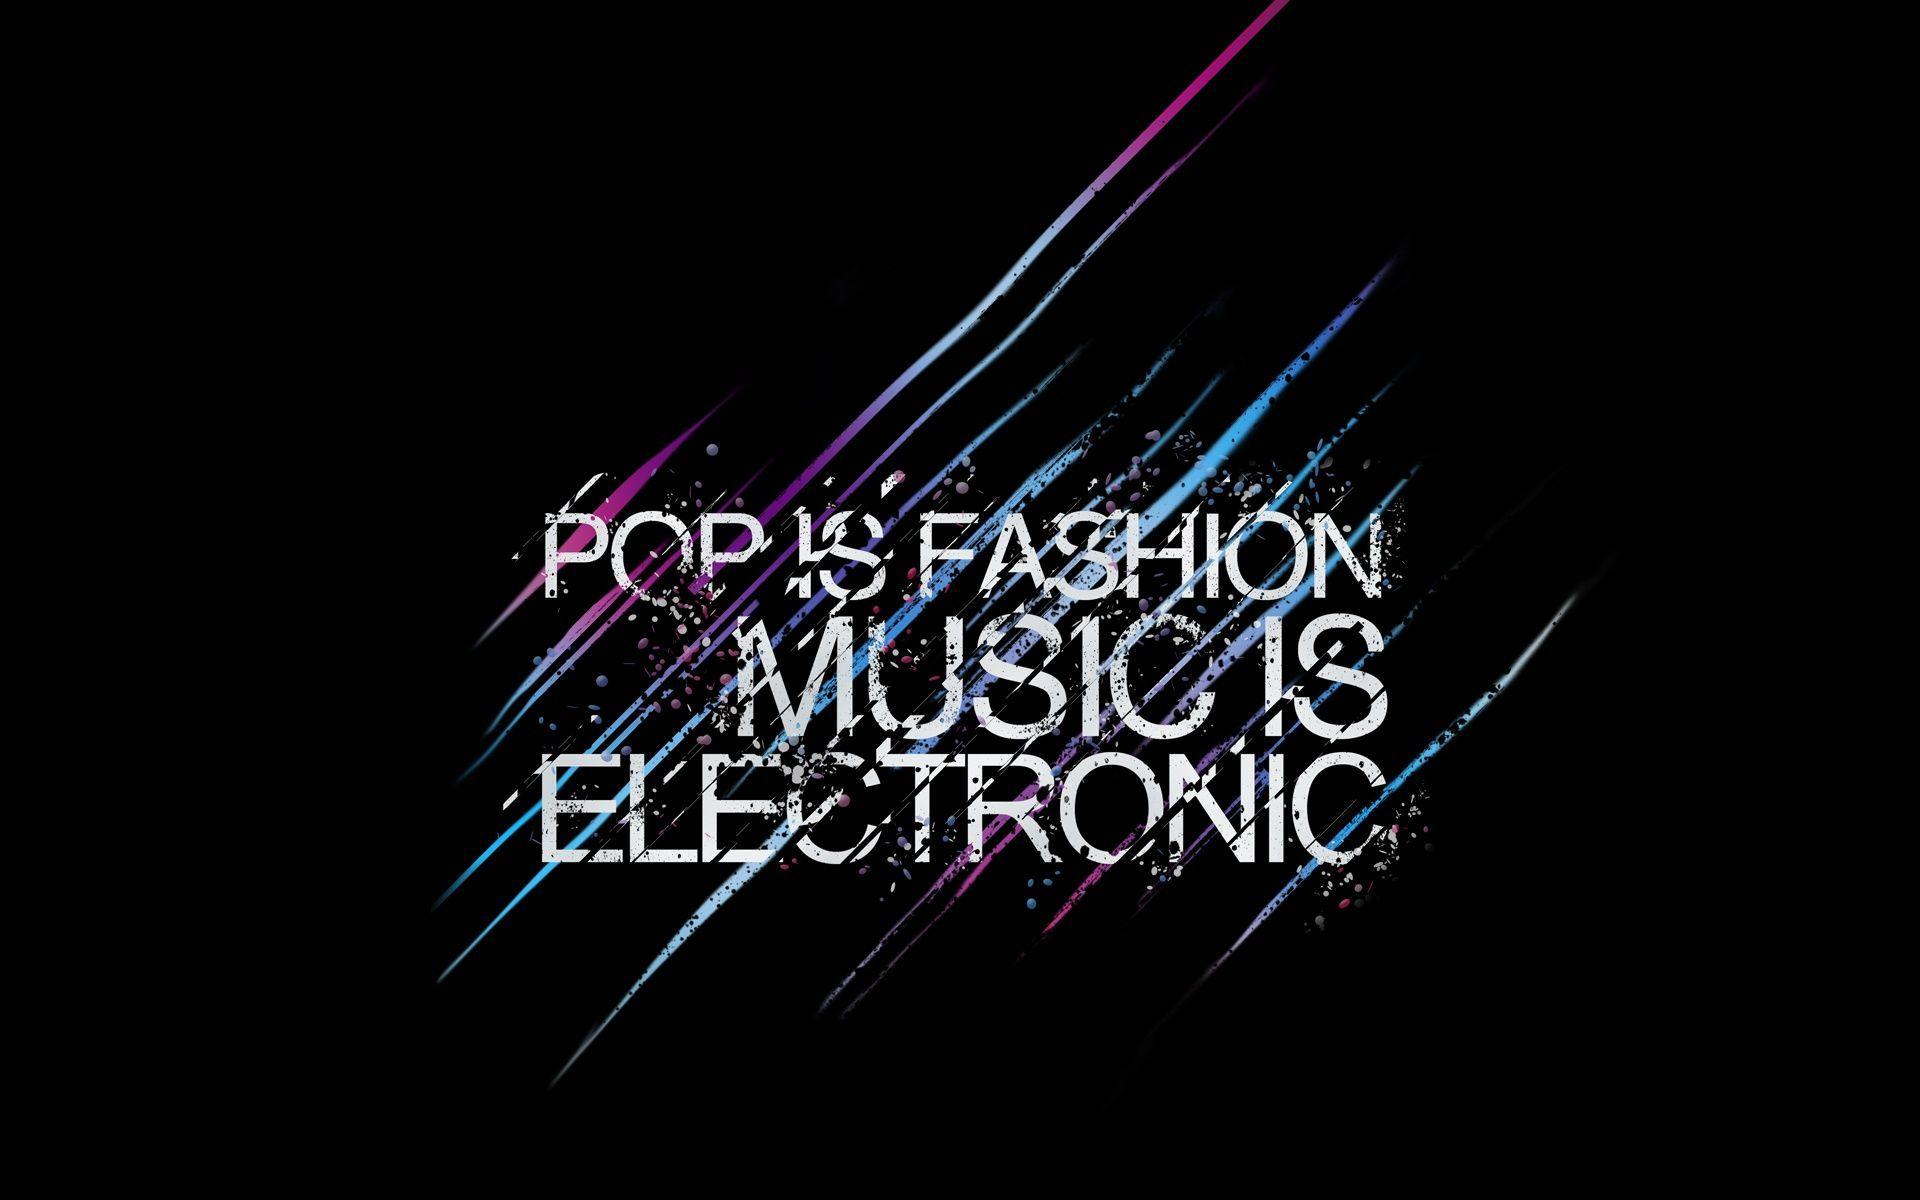 Electro Power HD and Wide Wallpaper. Art & Music